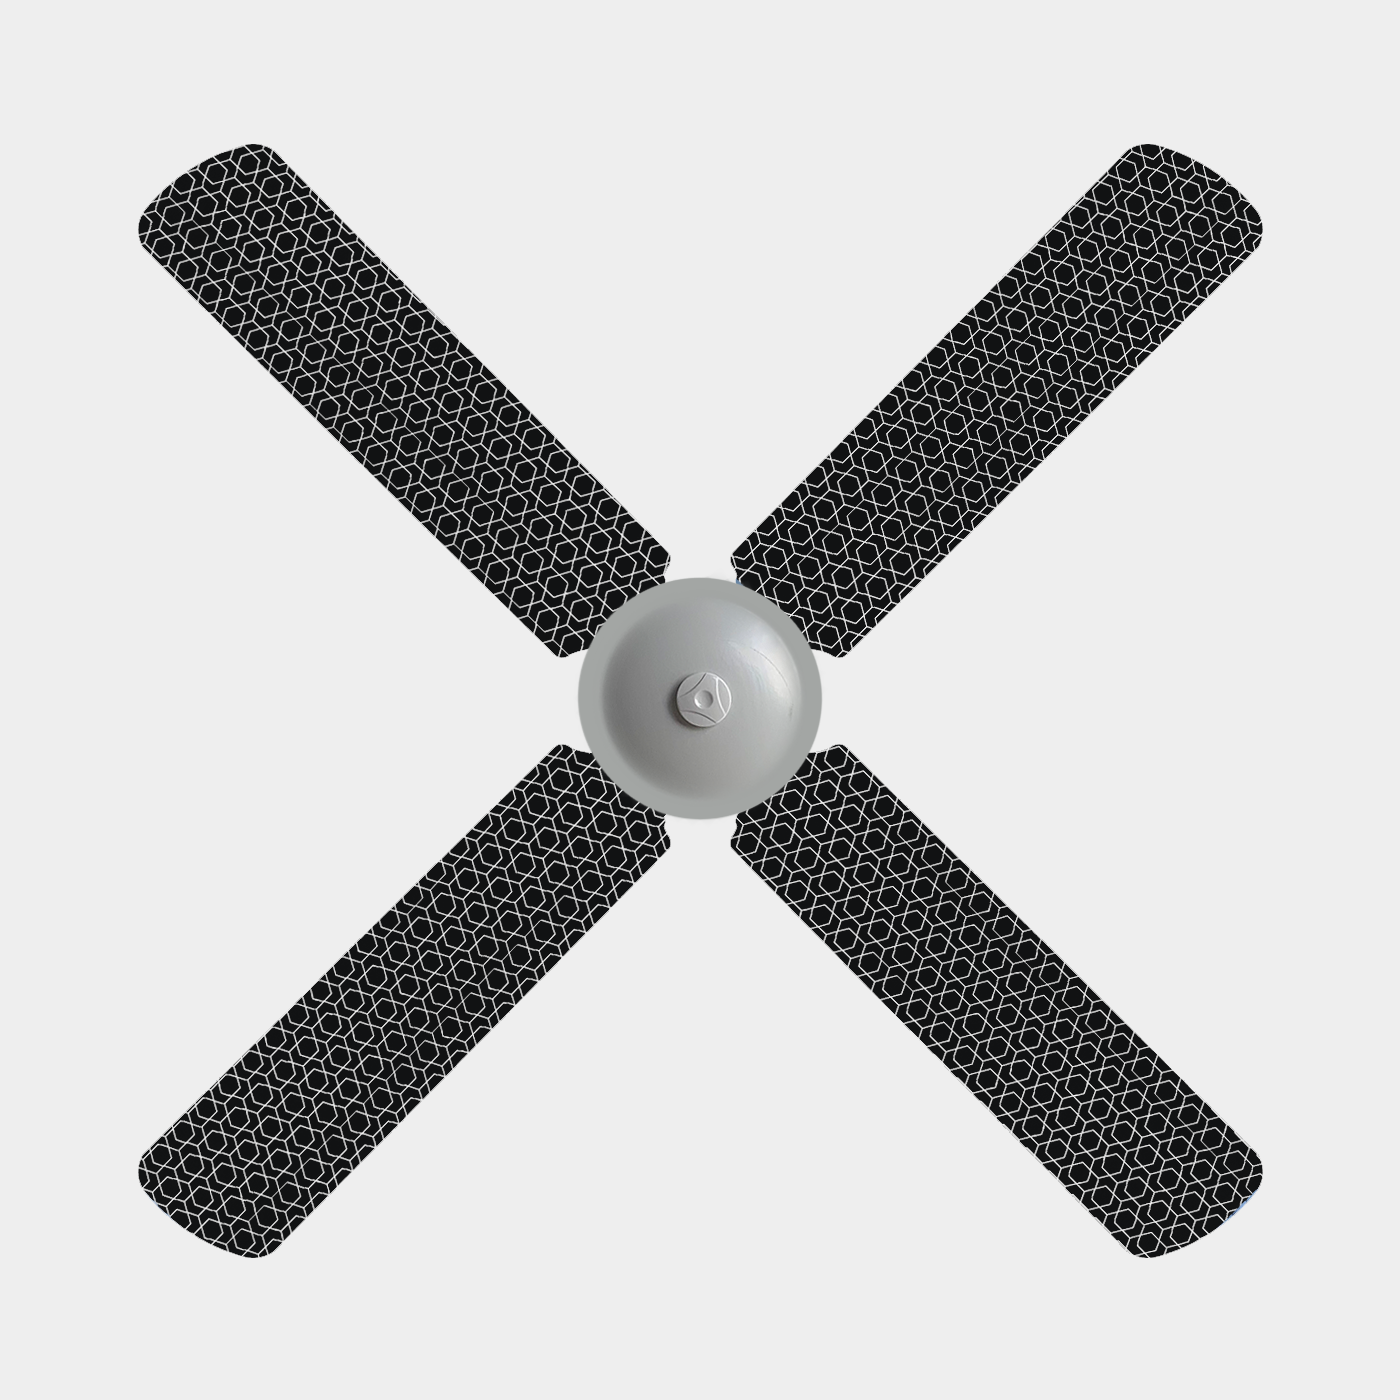 Four blade ceiling fan covers with black background and white geometric pattern